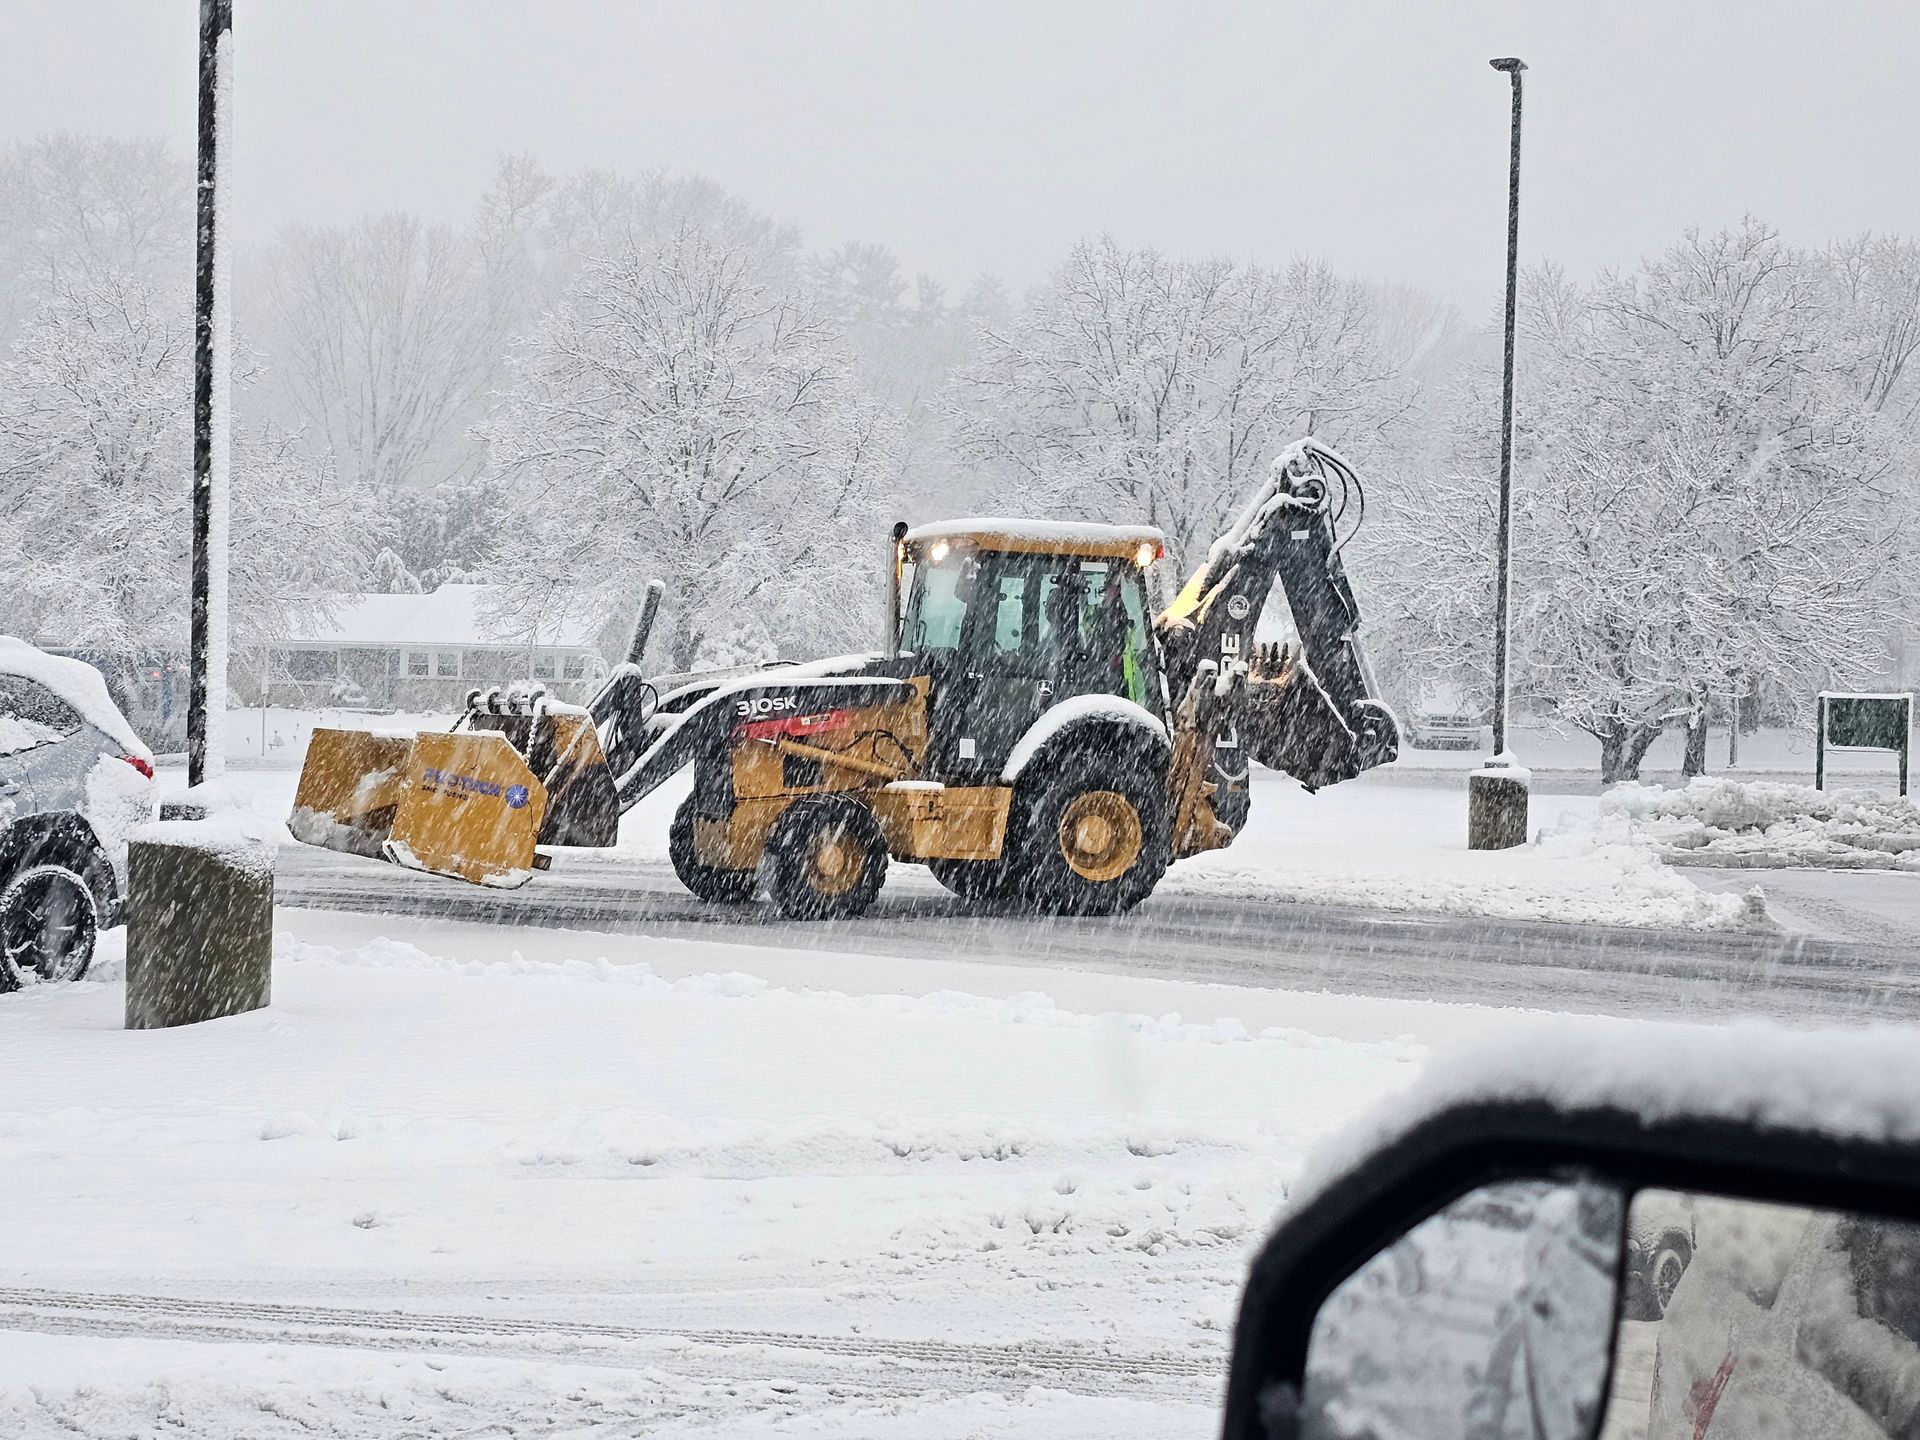 A yellow tractor is plowing snow in a parking lot.